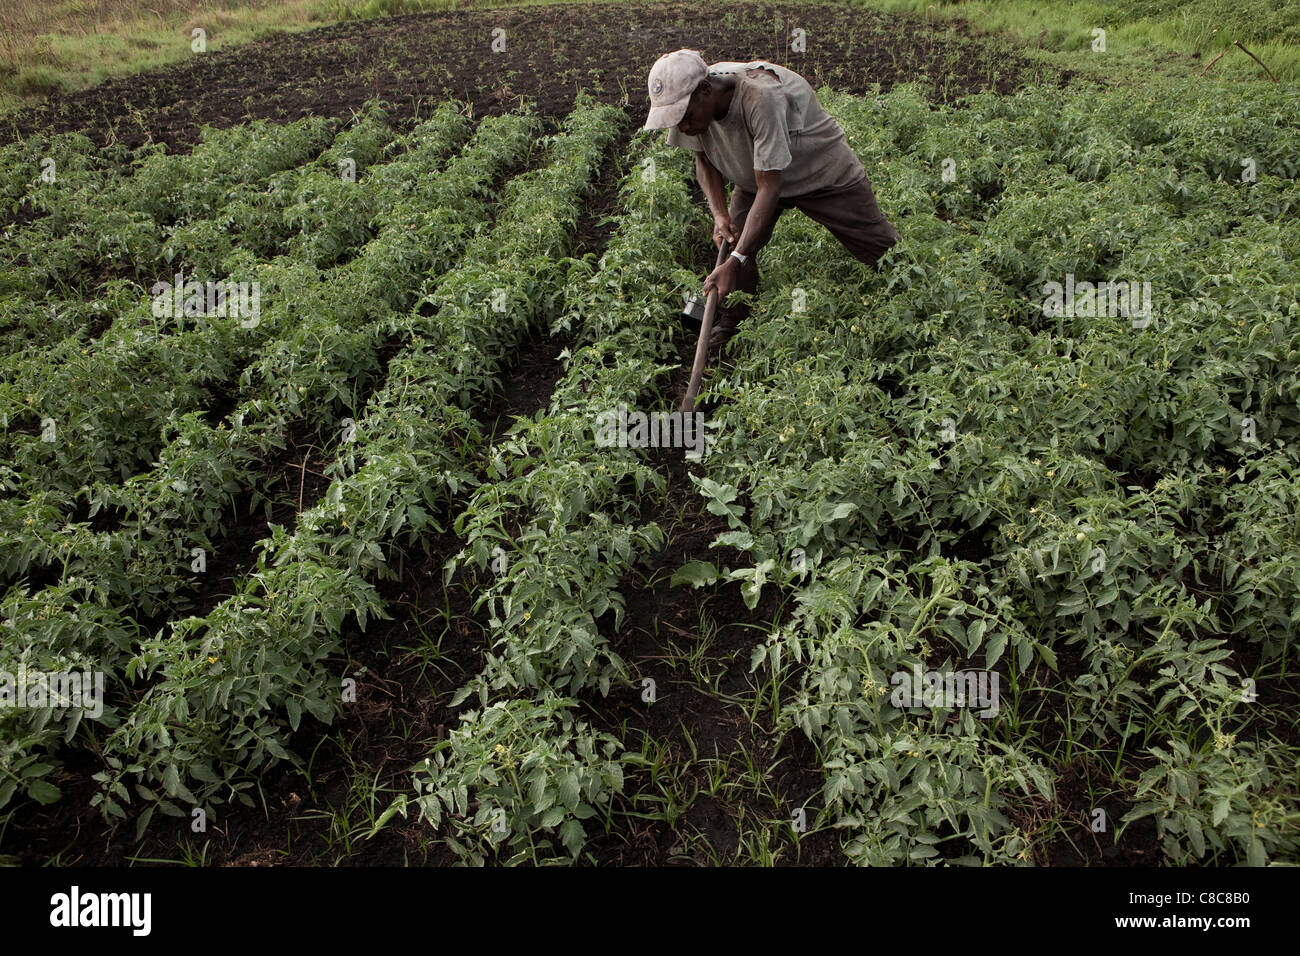 A farmer works in his vegetable fields in Mongu, Zambia, Southern Africa. Stock Photo